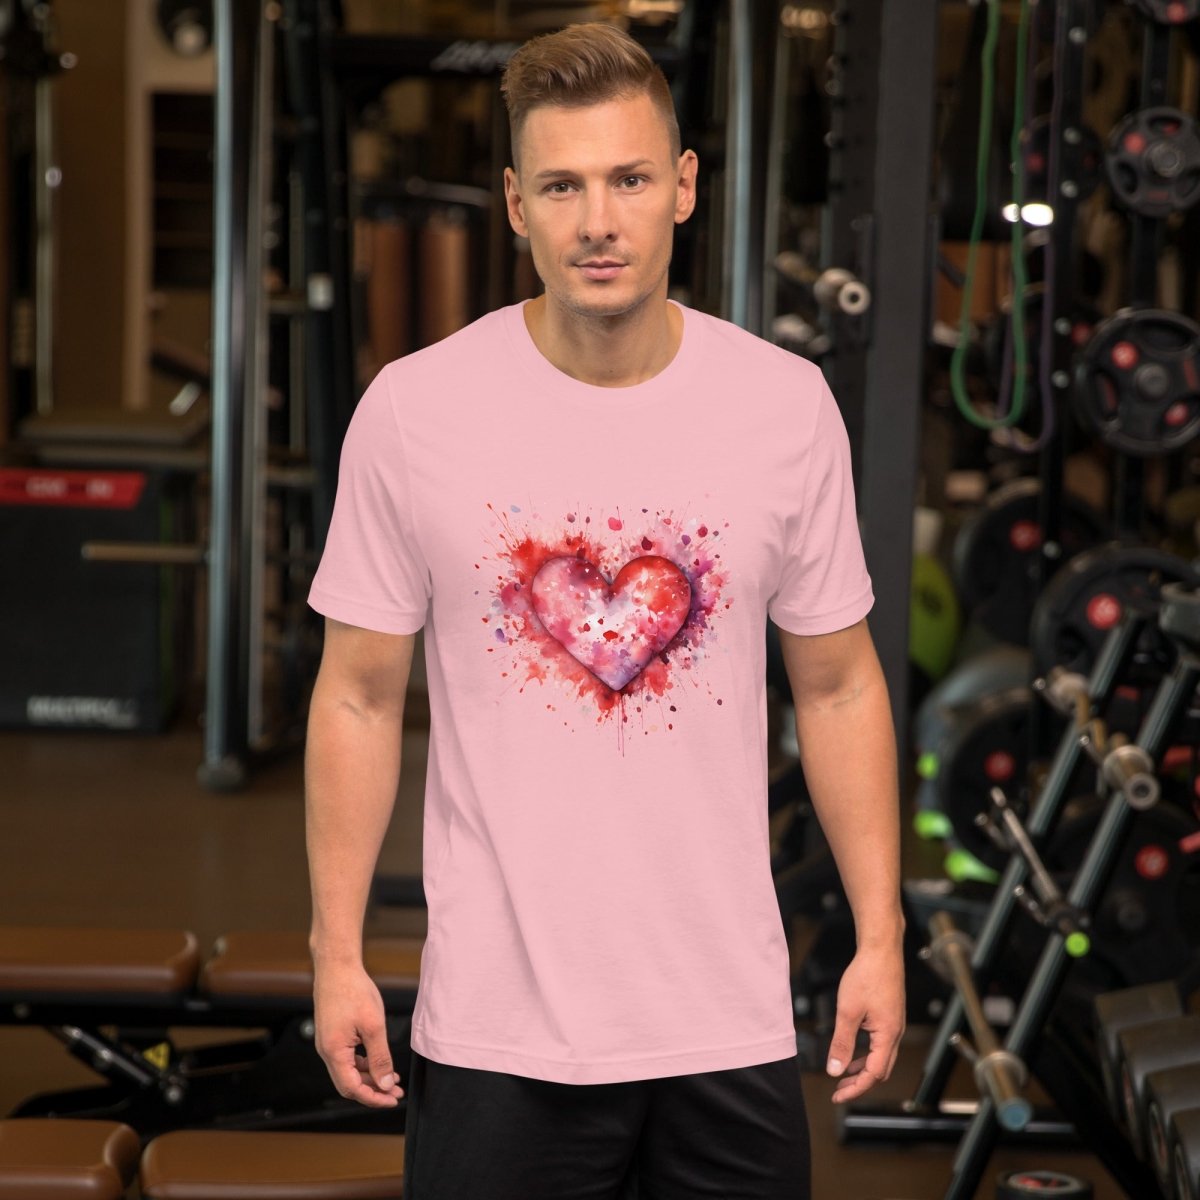 Heart T-Shirt High Quality Watercolor Heart Valentines Day Shirt Love Gift for Her Love Tee Anniversary Shirt Cute Heart Tee Love Shirt - Everything Pixel